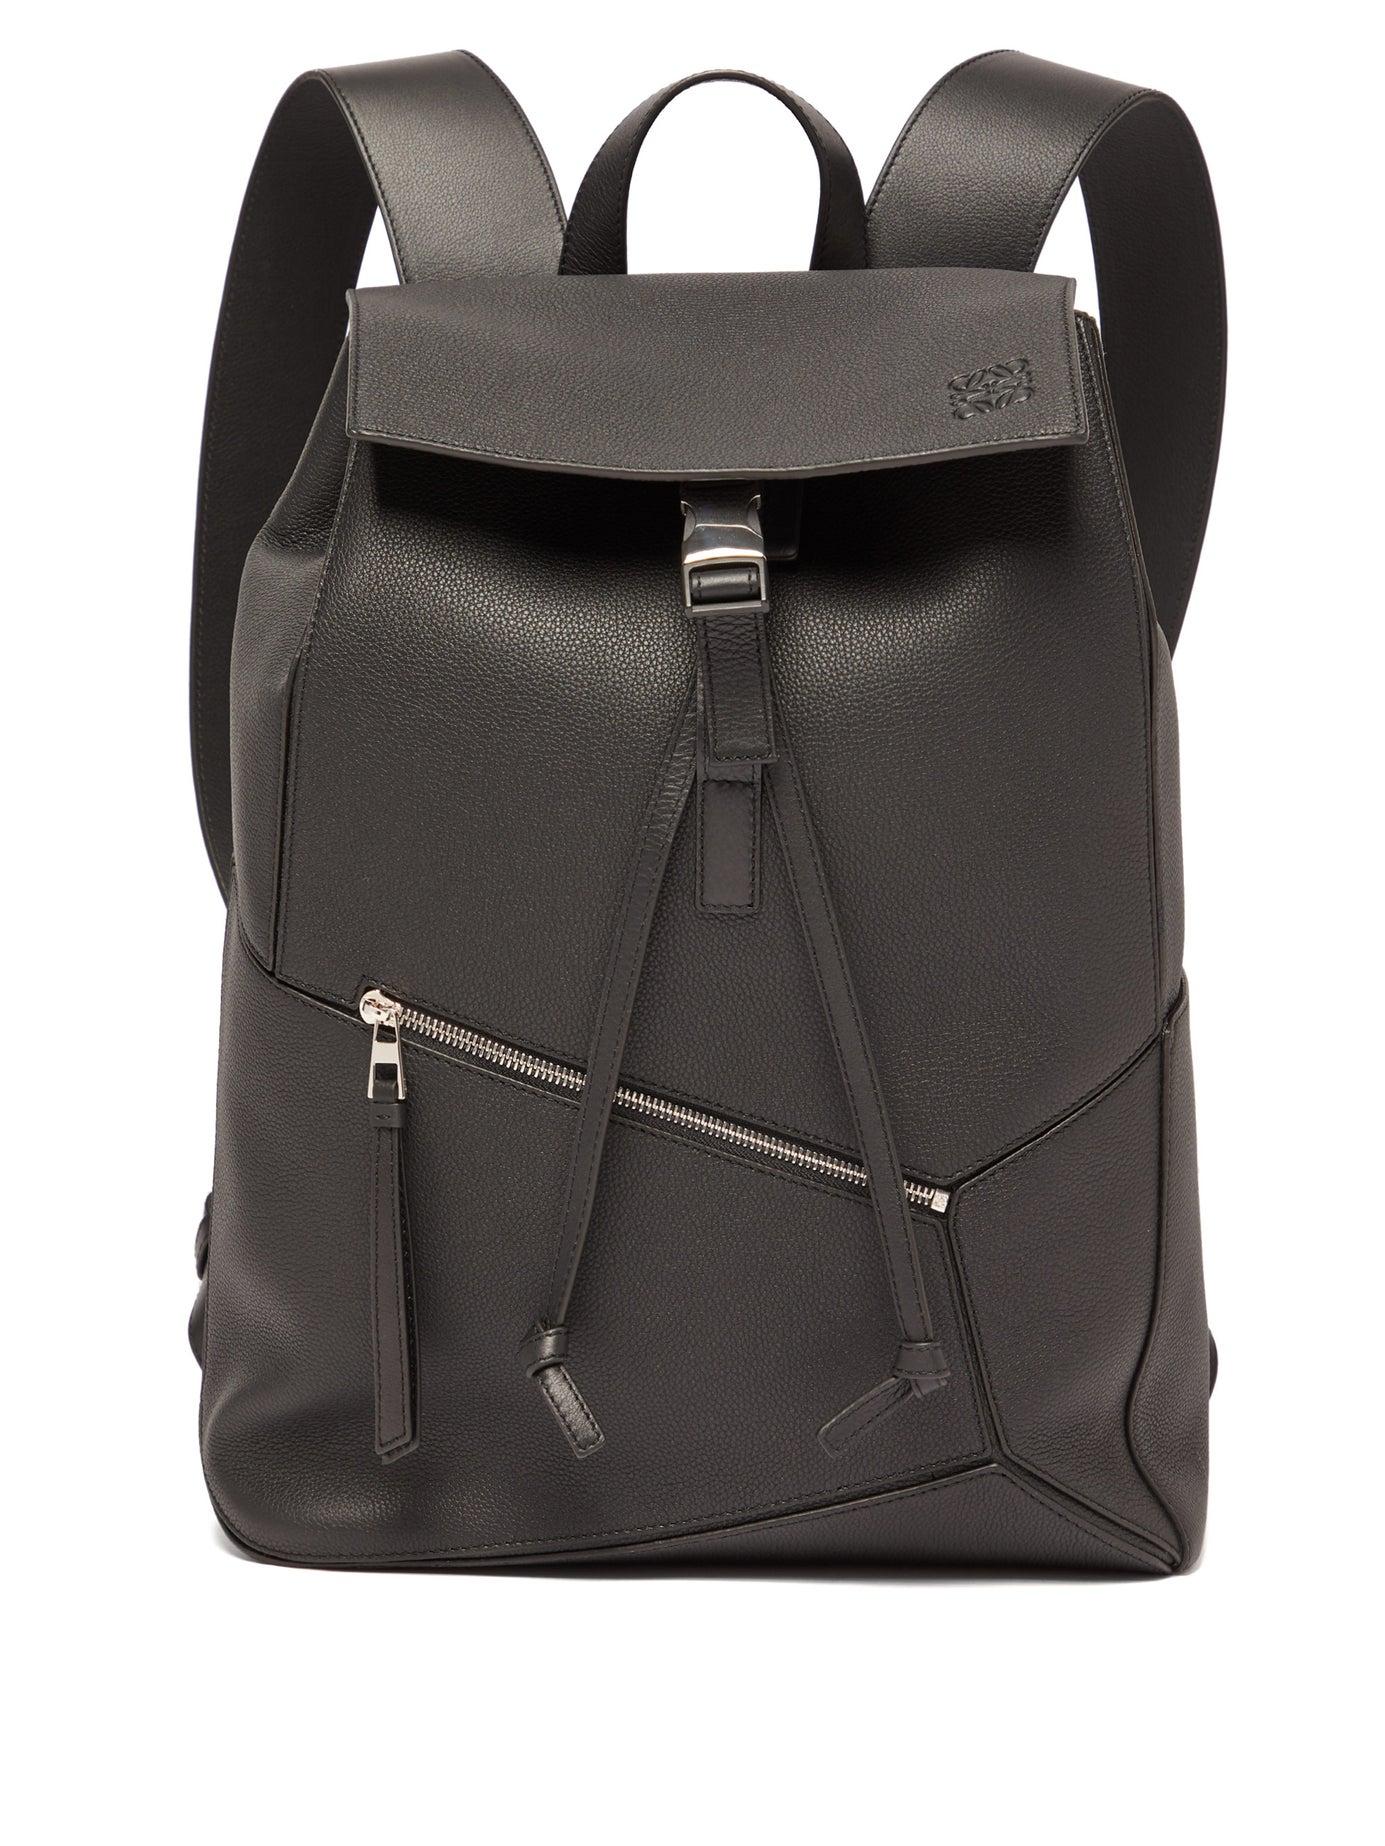 Loewe Puzzle Grained Leather Backpack in Black for Men - Lyst